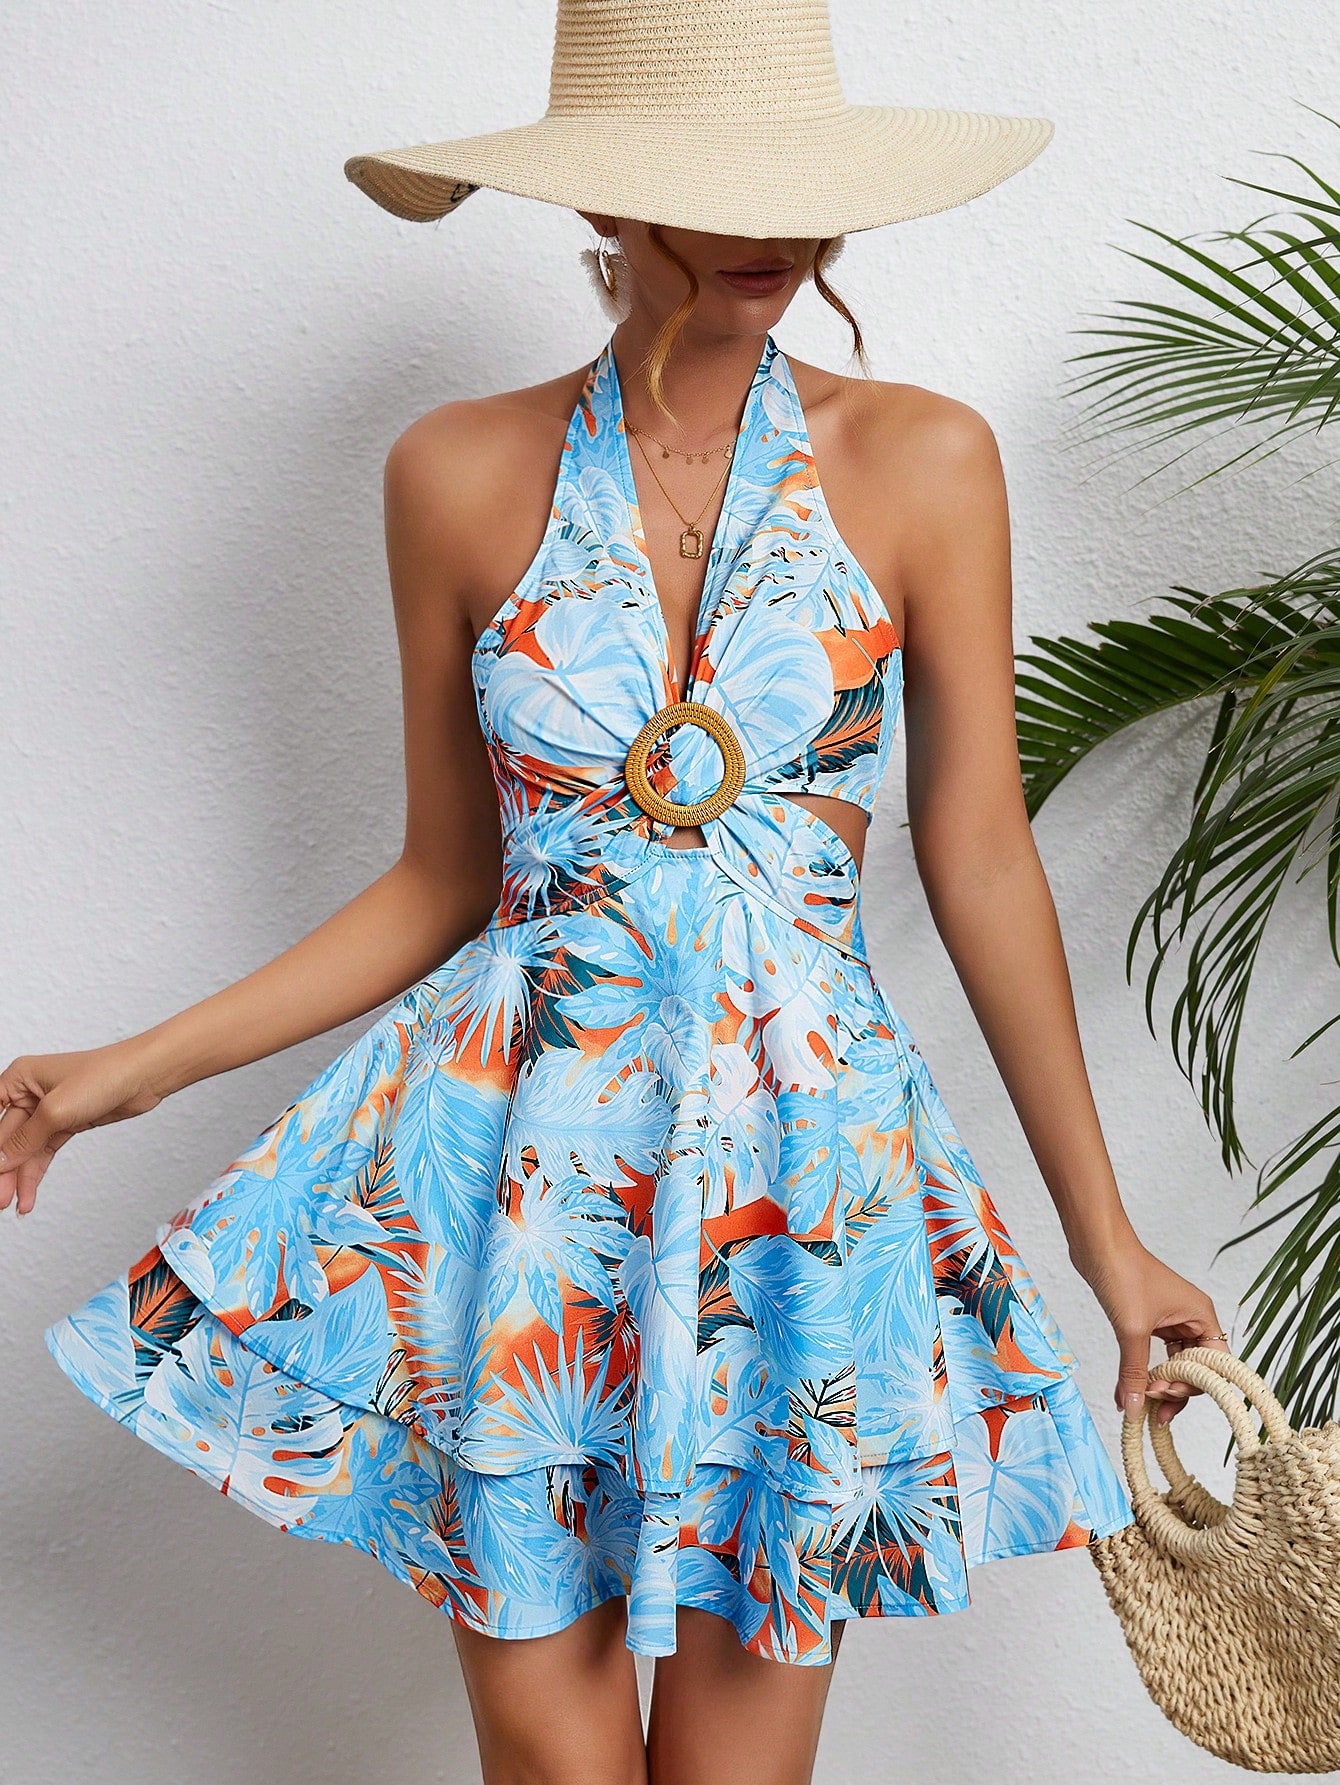 WYWH Tropical Print O-ring Detail Layered Hem Tie Backless Halter Dress